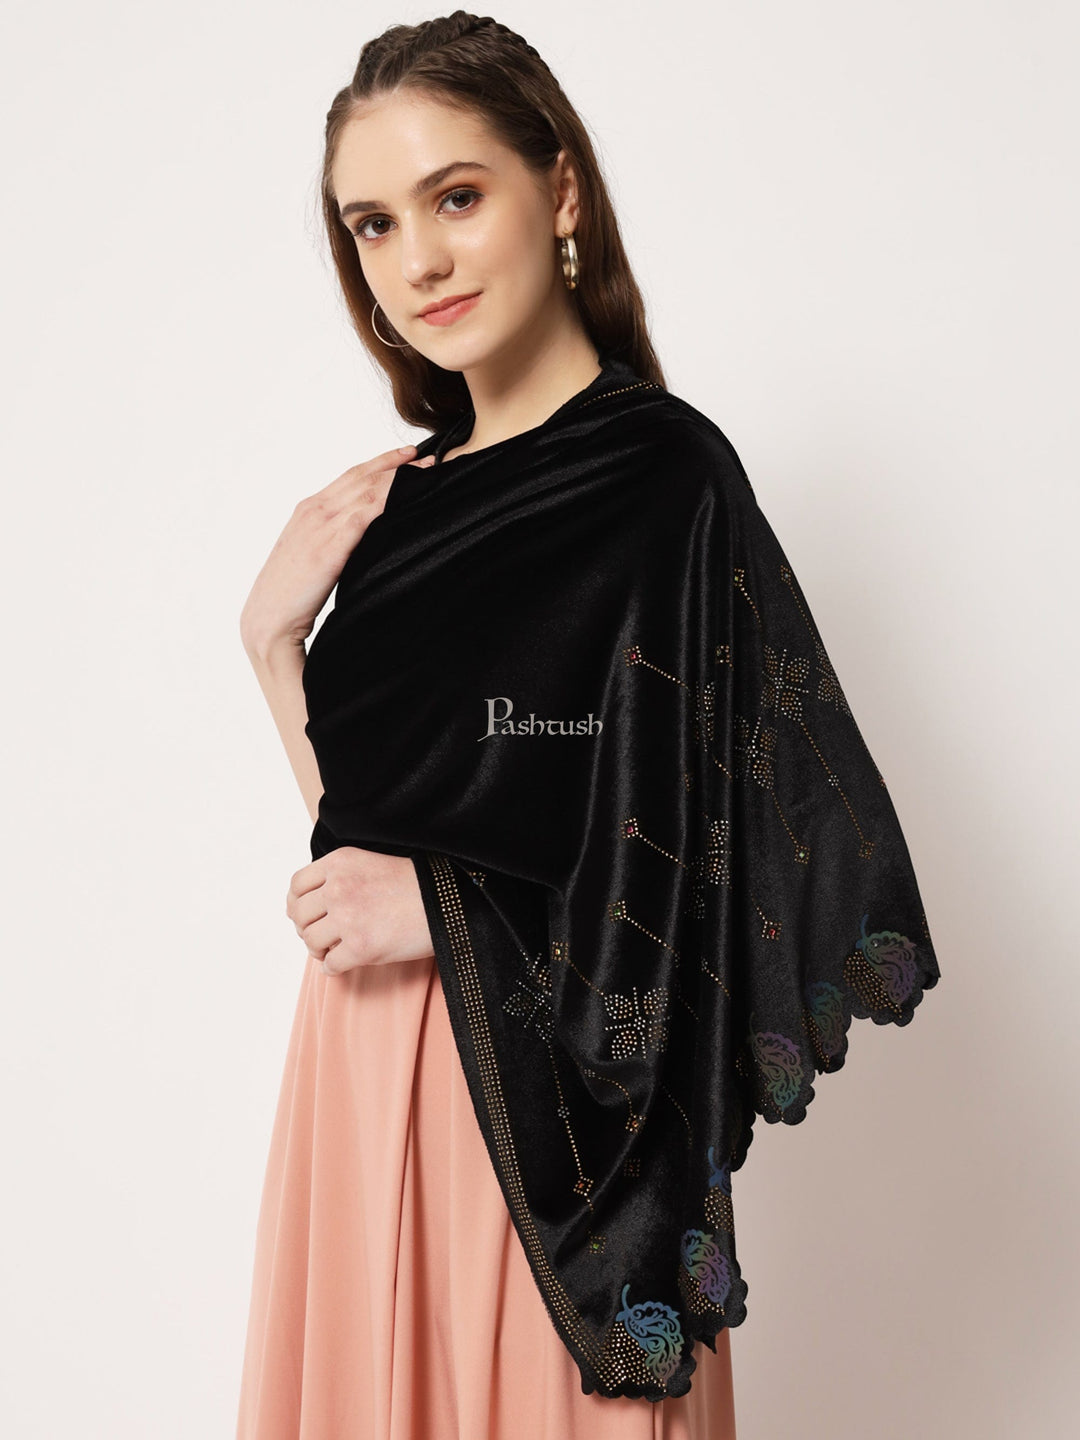 Pashtush India Womens Stoles and Scarves Scarf Pashtush Womens Soft Velvet Stole, Embellished With Shimmery Crystal Work, Twilight Collection, Black